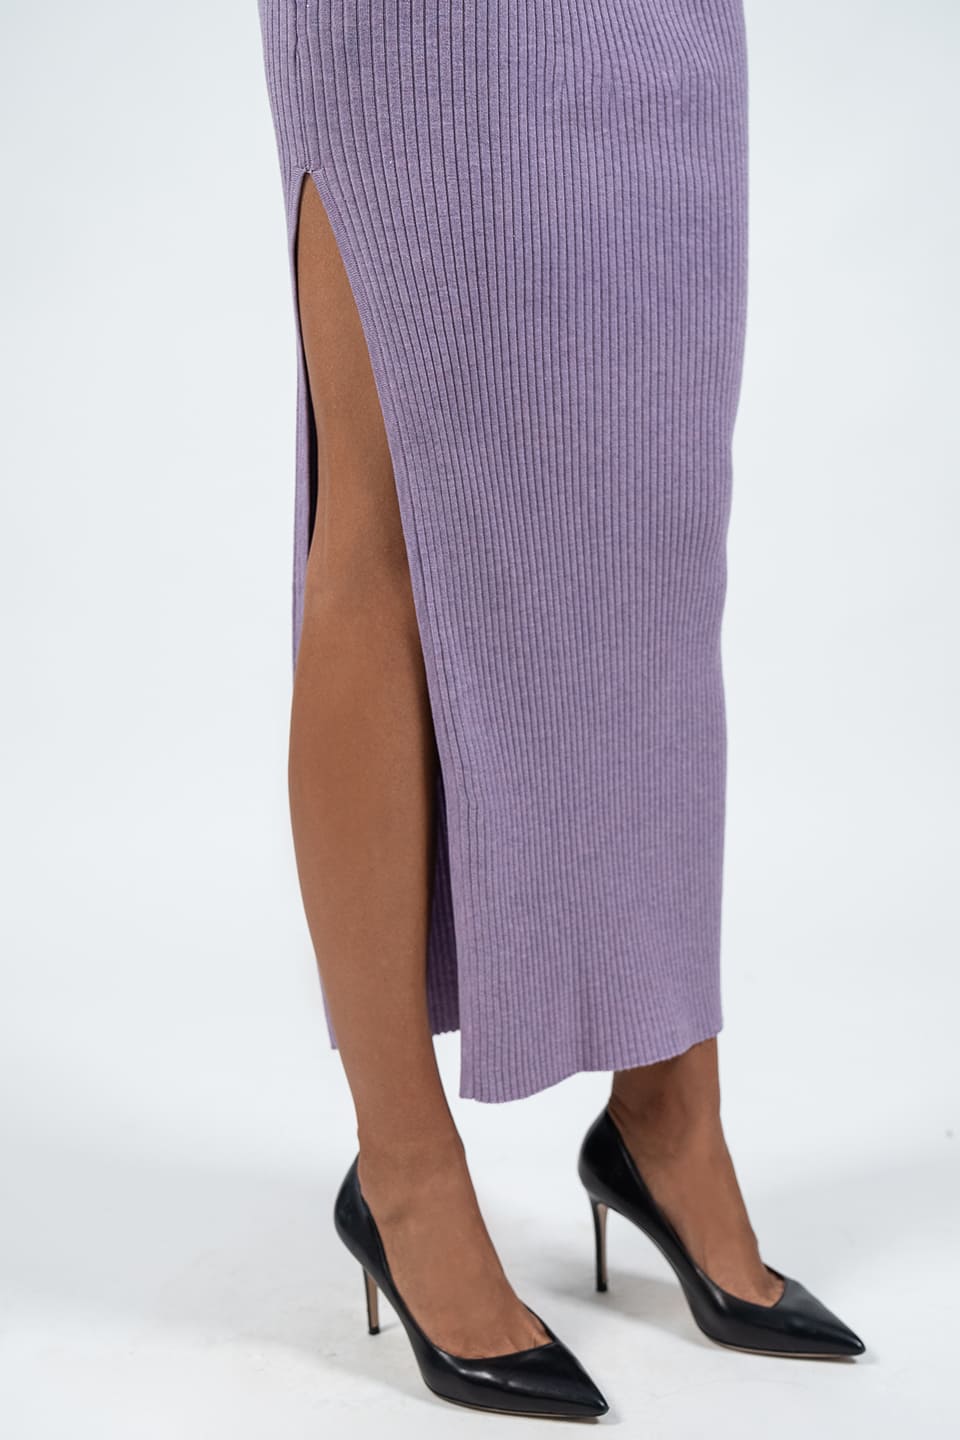 Thumbnail for Product gallery 4, Zina Skirt Violet